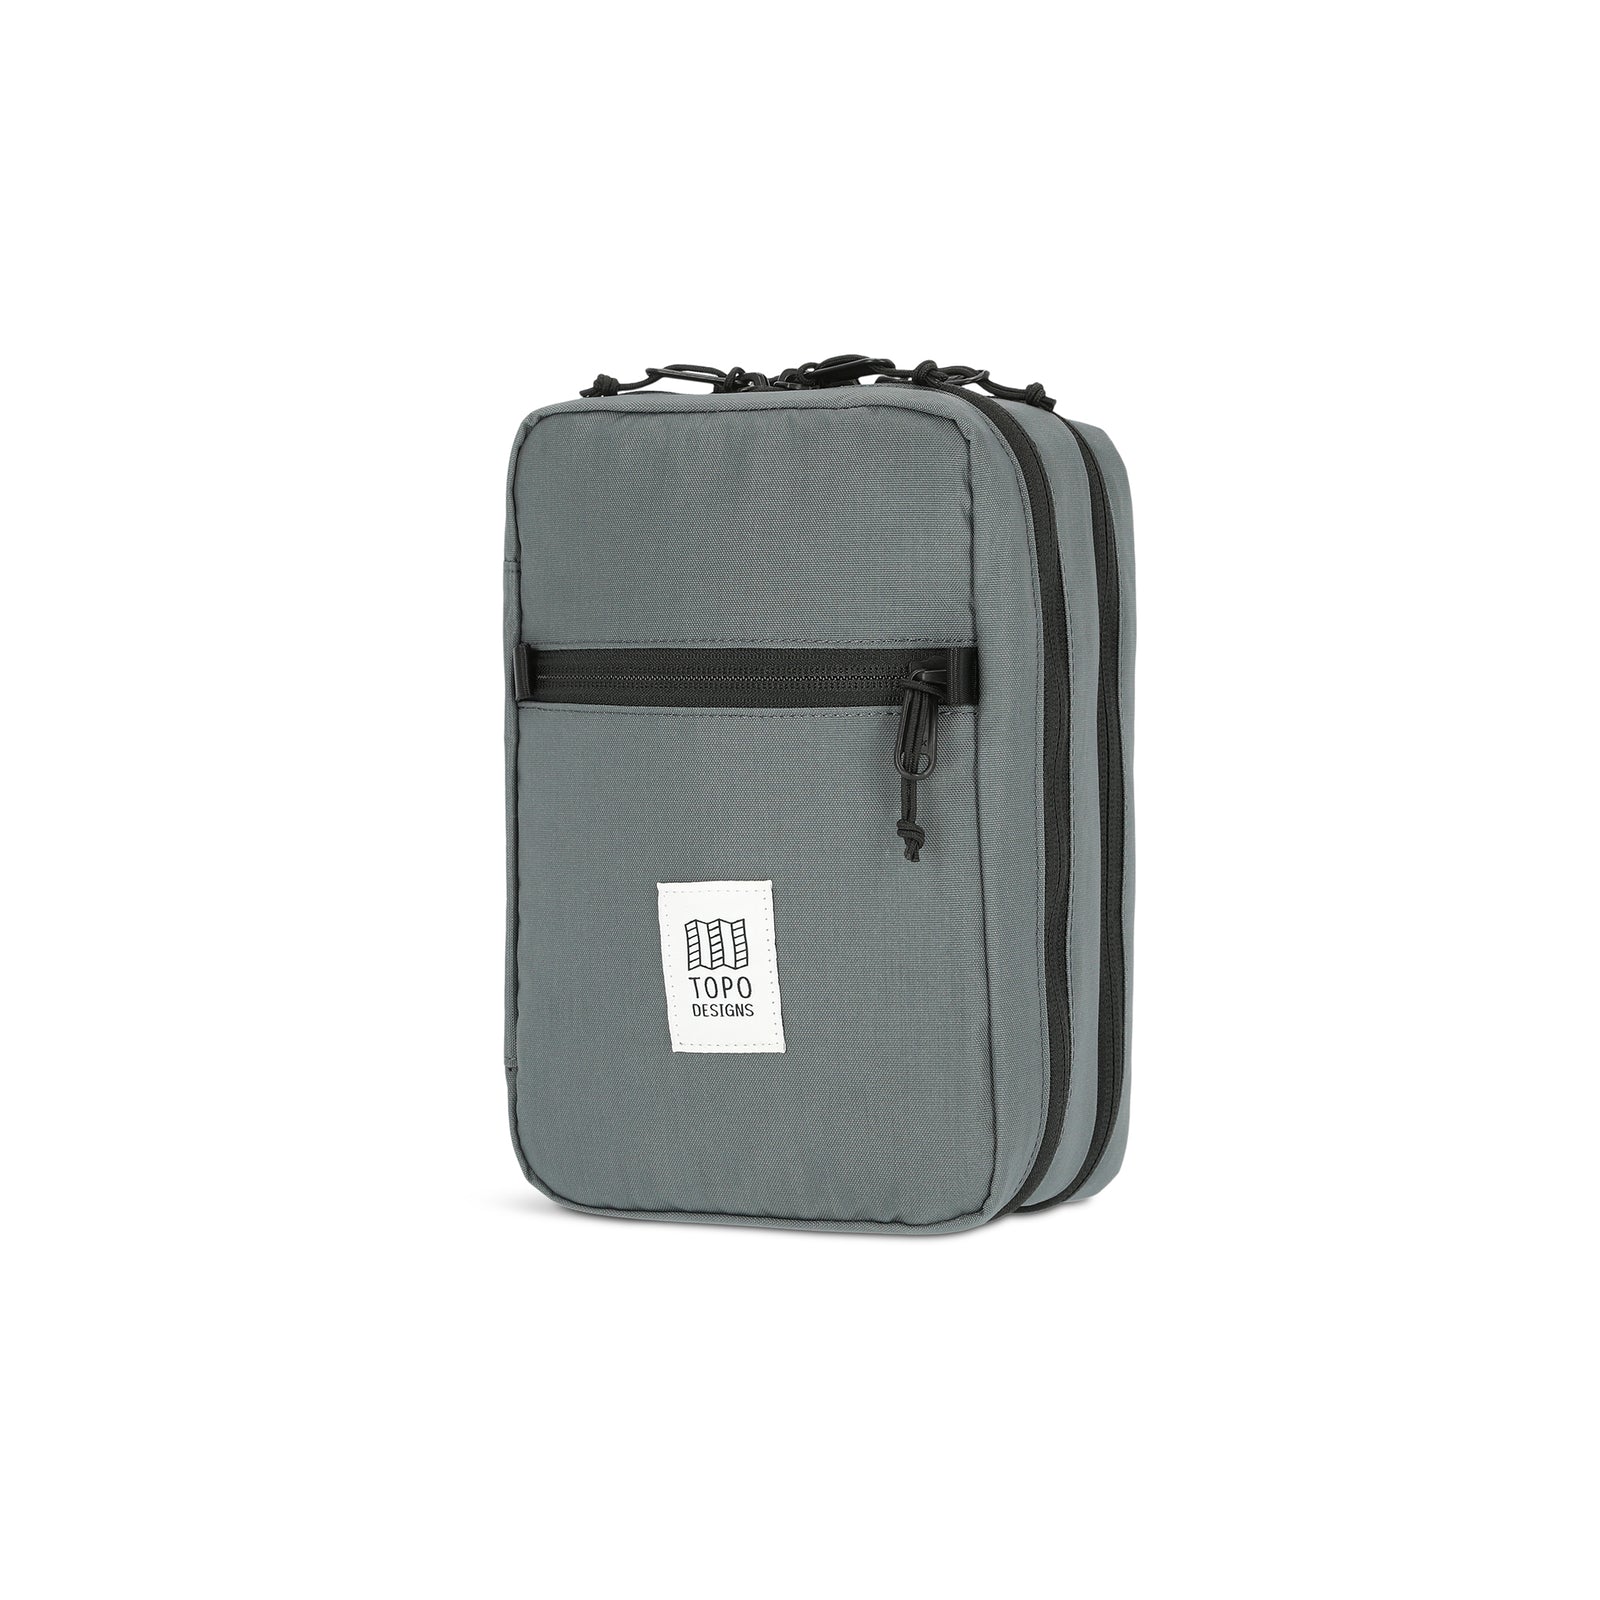 Topo Designs Tech electronics organization travel Case in "Charcoal" gray recycled nylon.